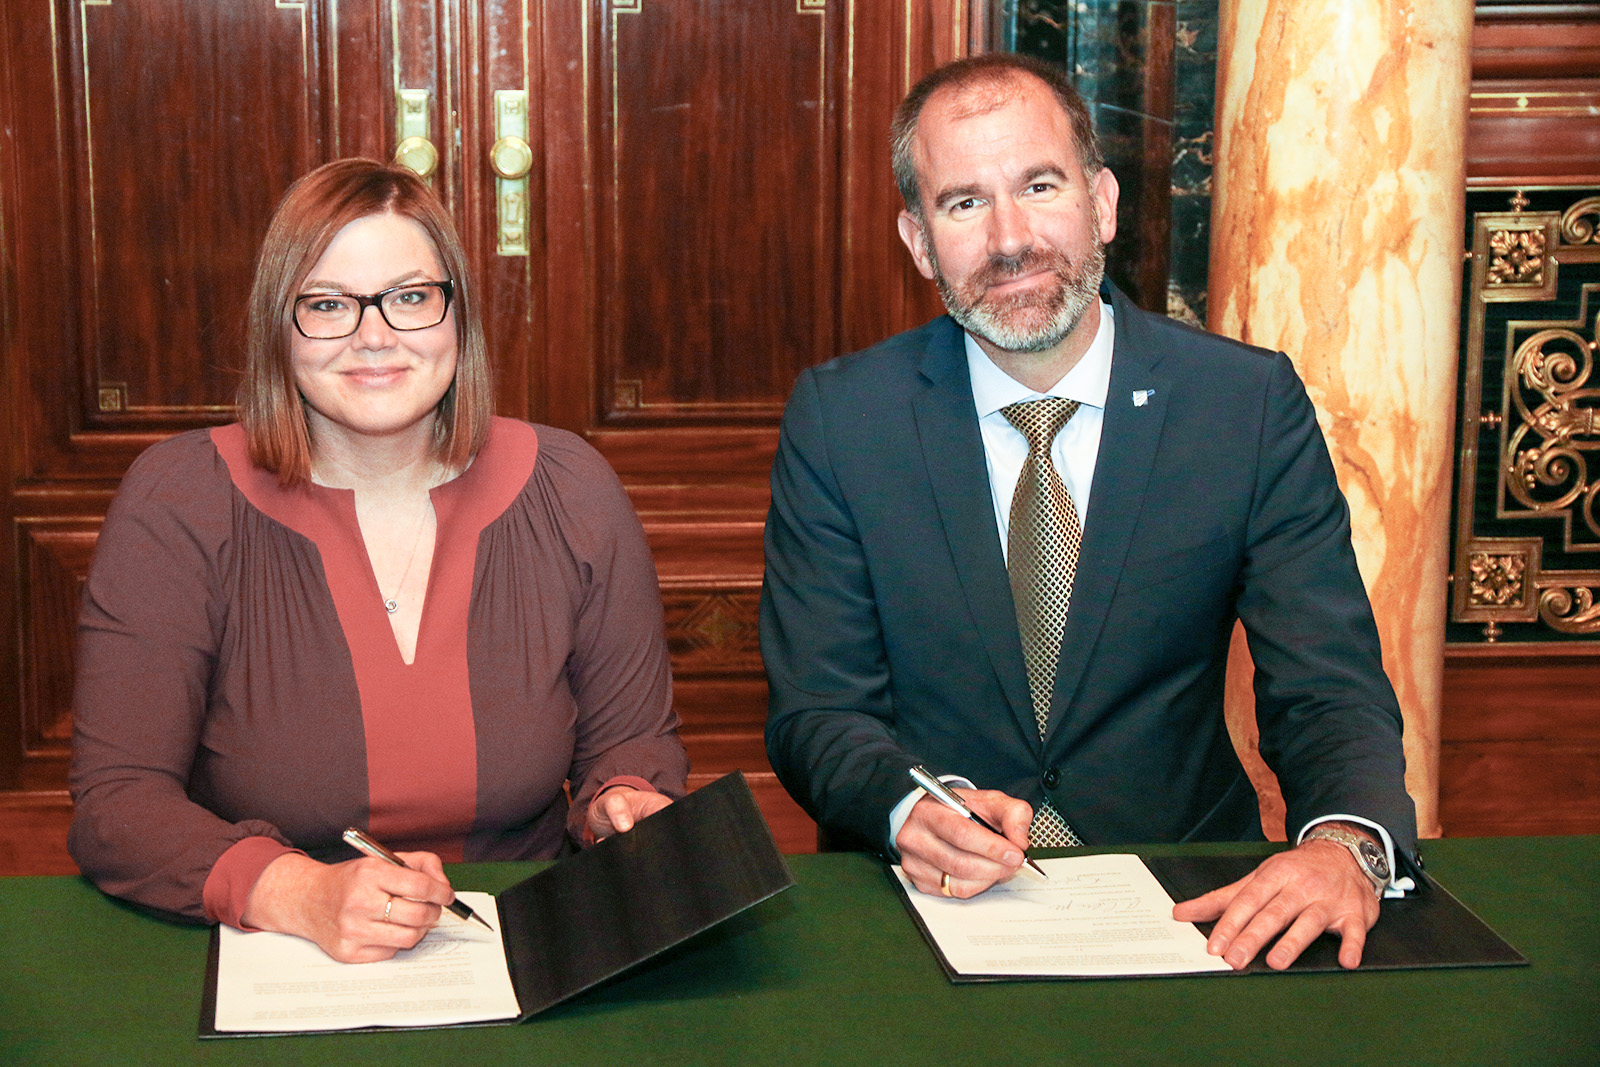 Katharina Fegebank, Second Mayor of the Free and Hanseatic City of Hamburg and Senator for Science, Research and Equality, and Dr. Raoul Klingner, Director of Research at the Fraunhofer-Gesellschaft, signing the site agreement to expand the research location in Hamburg.